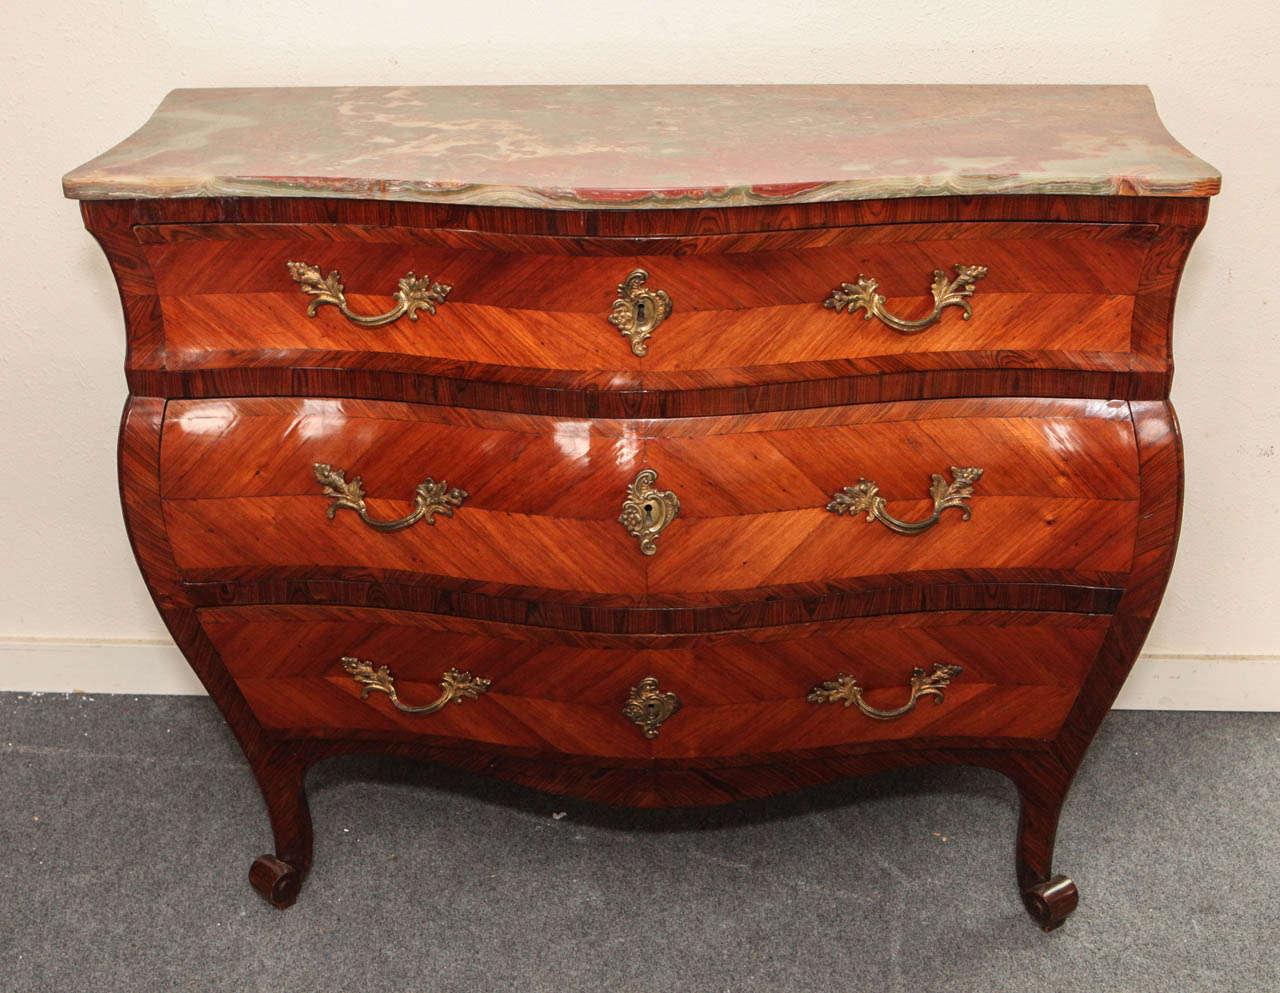 Exceptional, three-drawer, serpentine, commode veneered with pear, olive and fruit woods featuring original hardware and a new, Italian, onyx top.